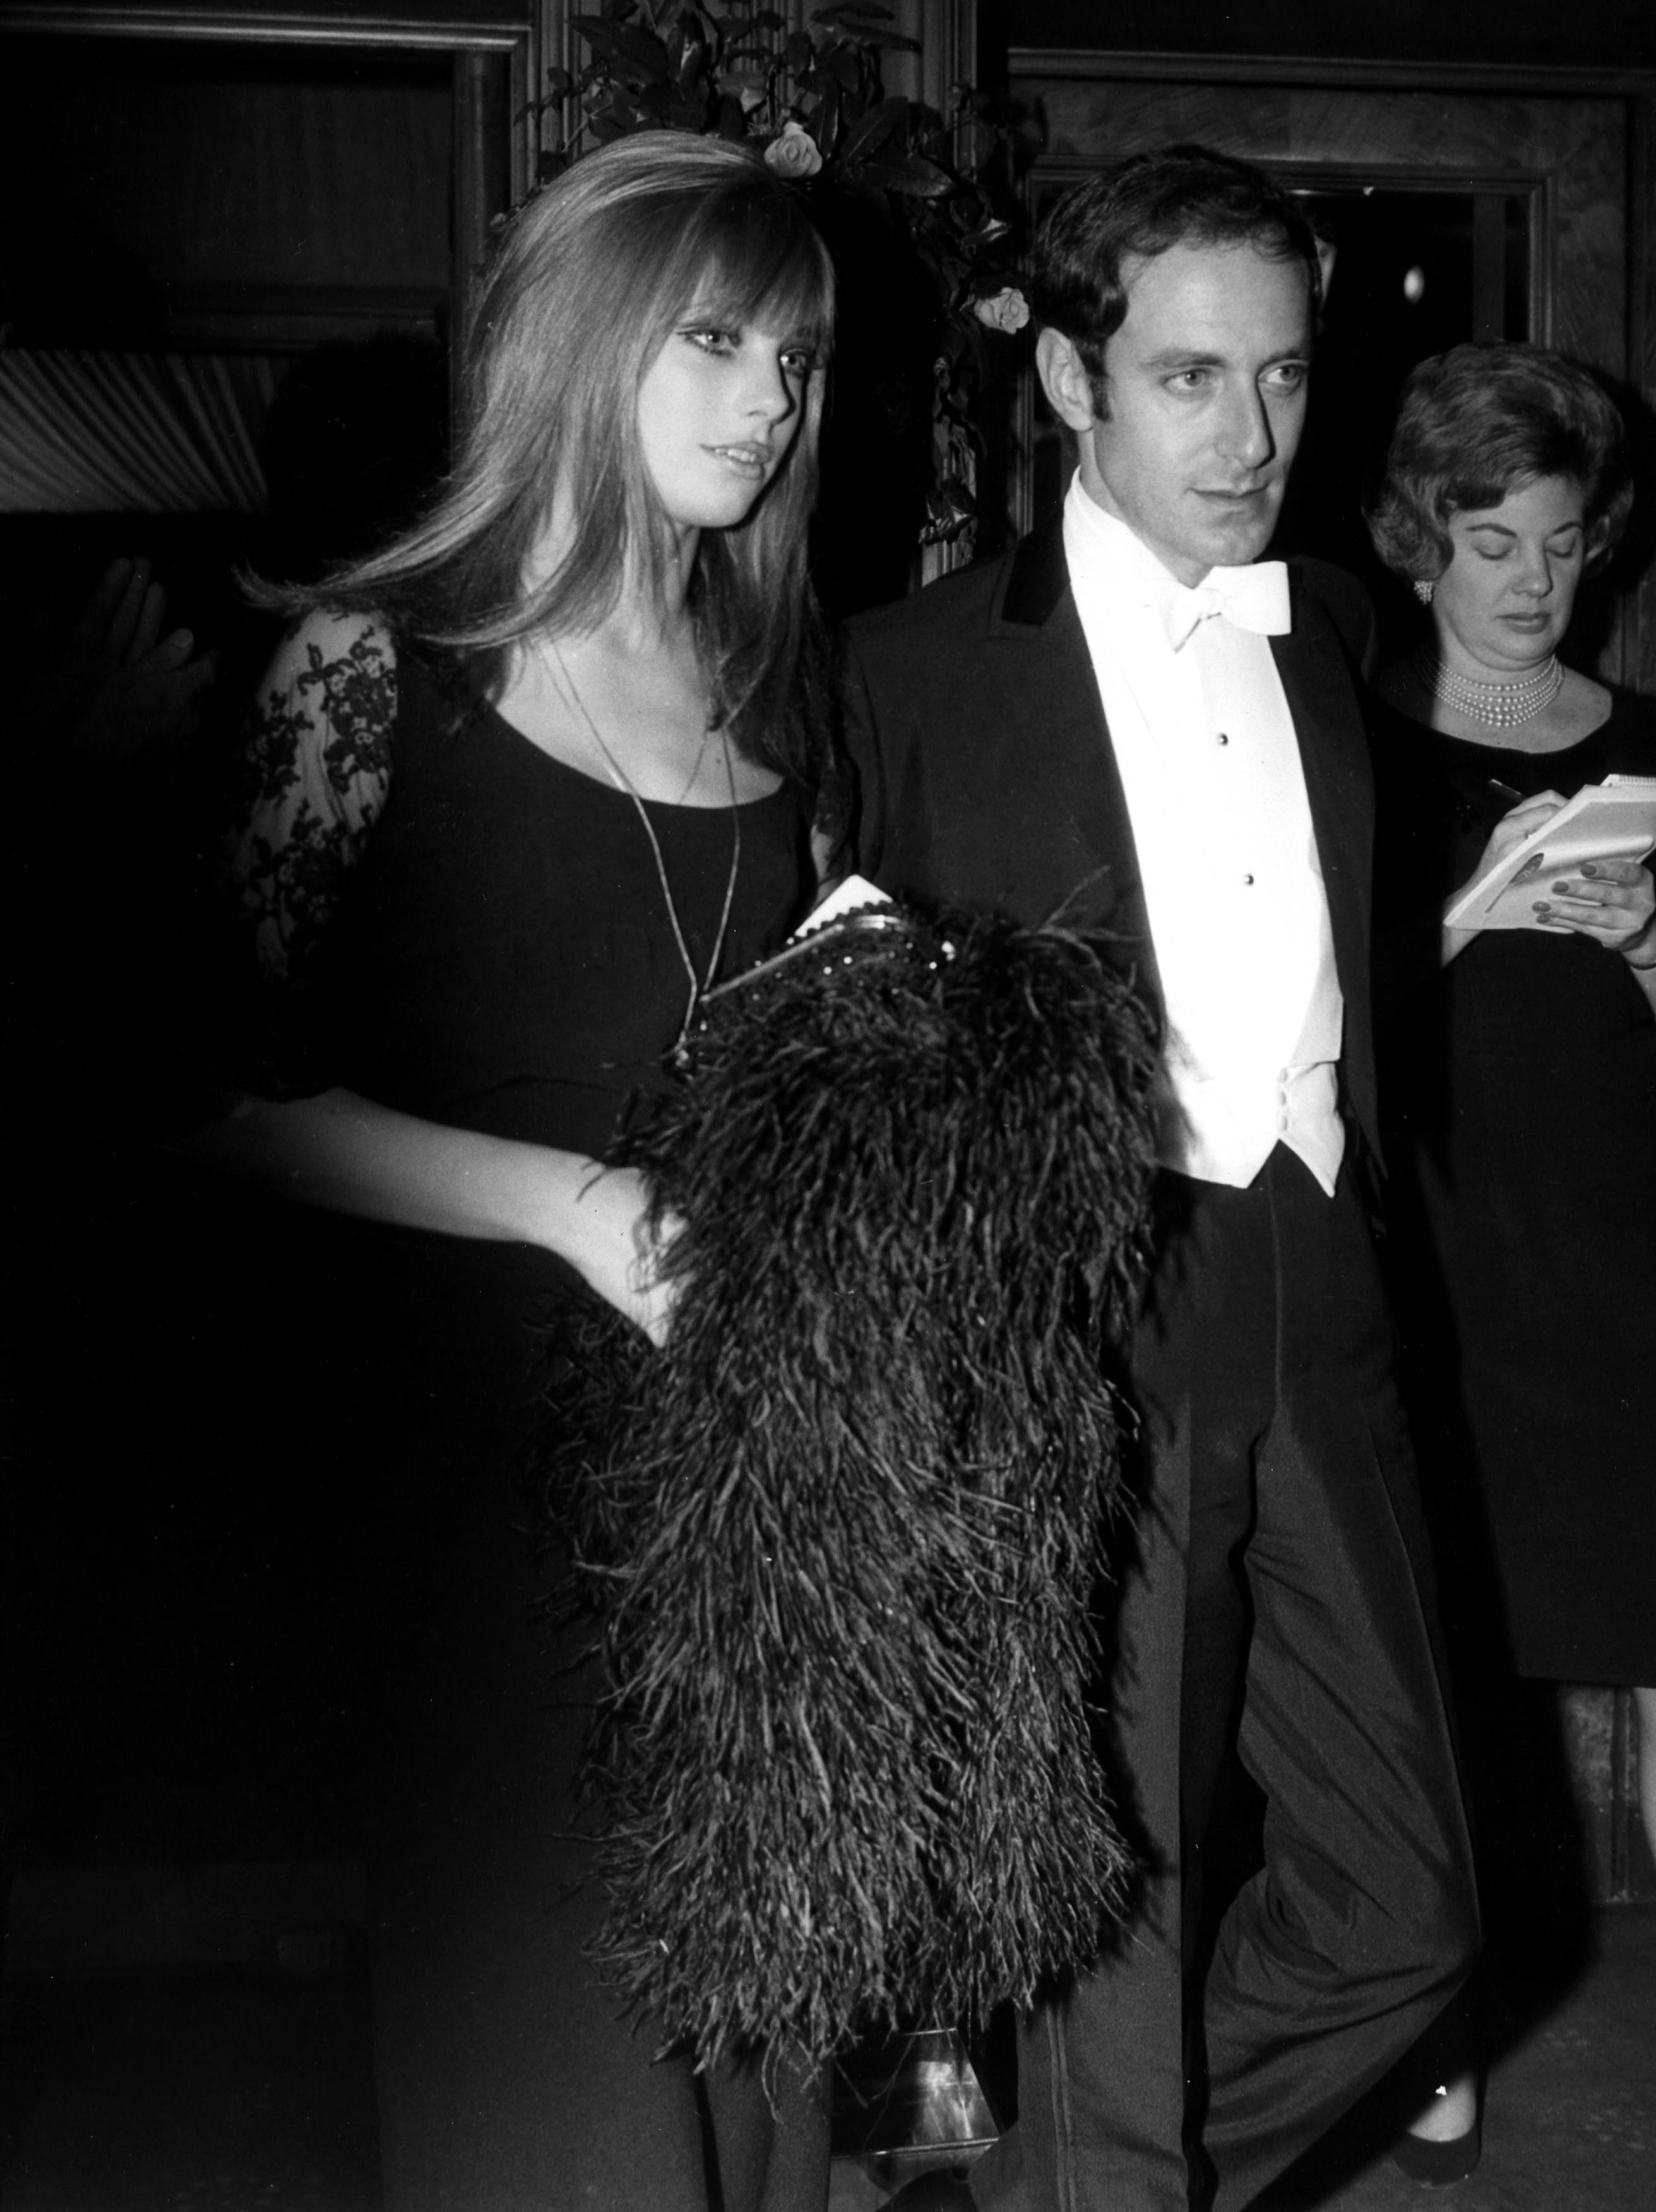 John Barry and Jane Birkin attending an event in 1966. | Source: Getty Images